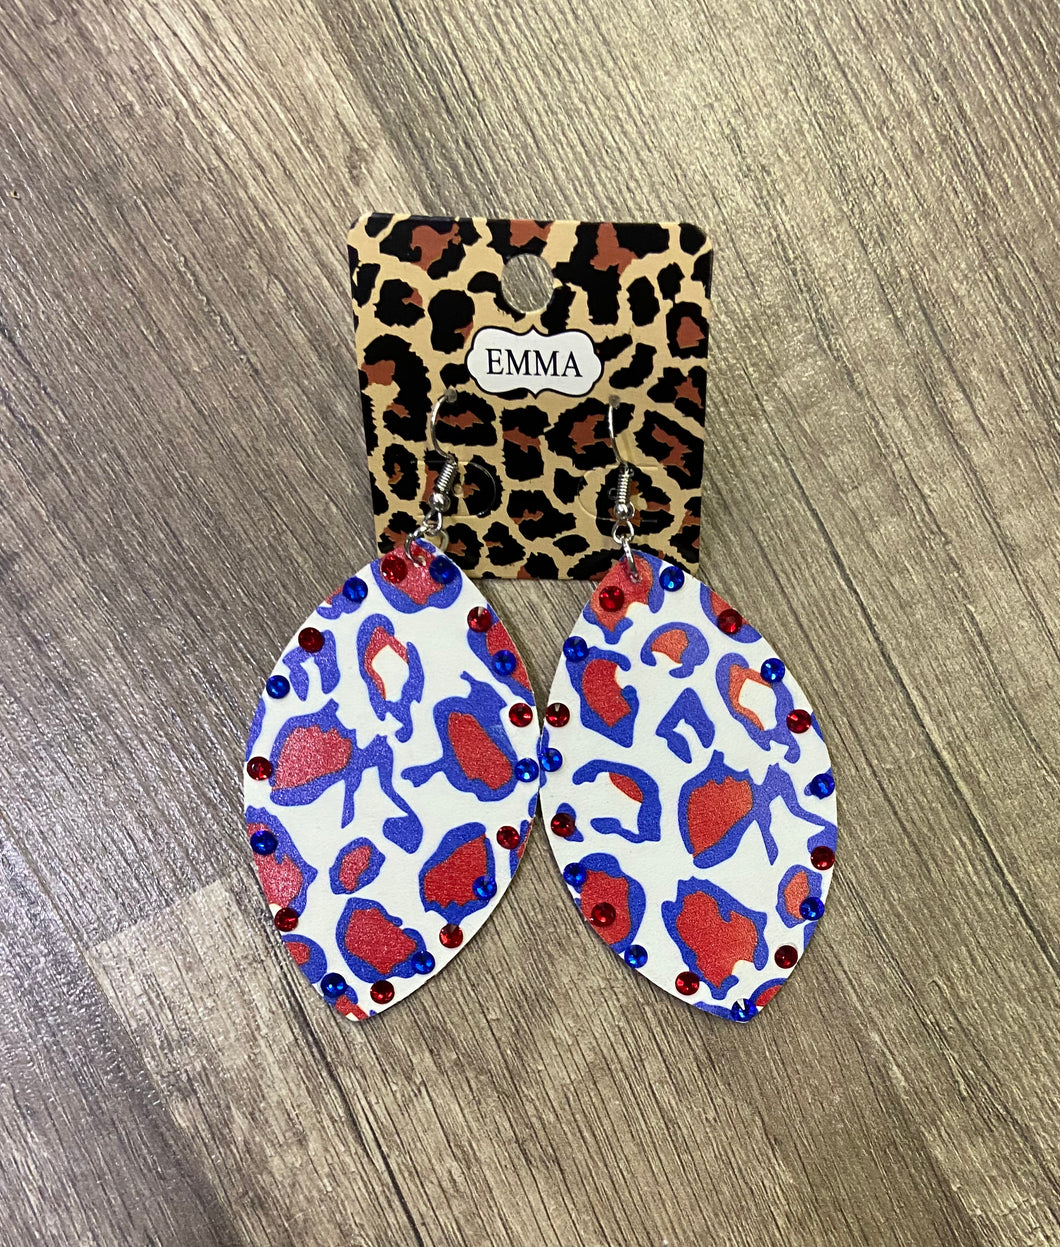 Red, White and Blue Camo Leopard Earrings